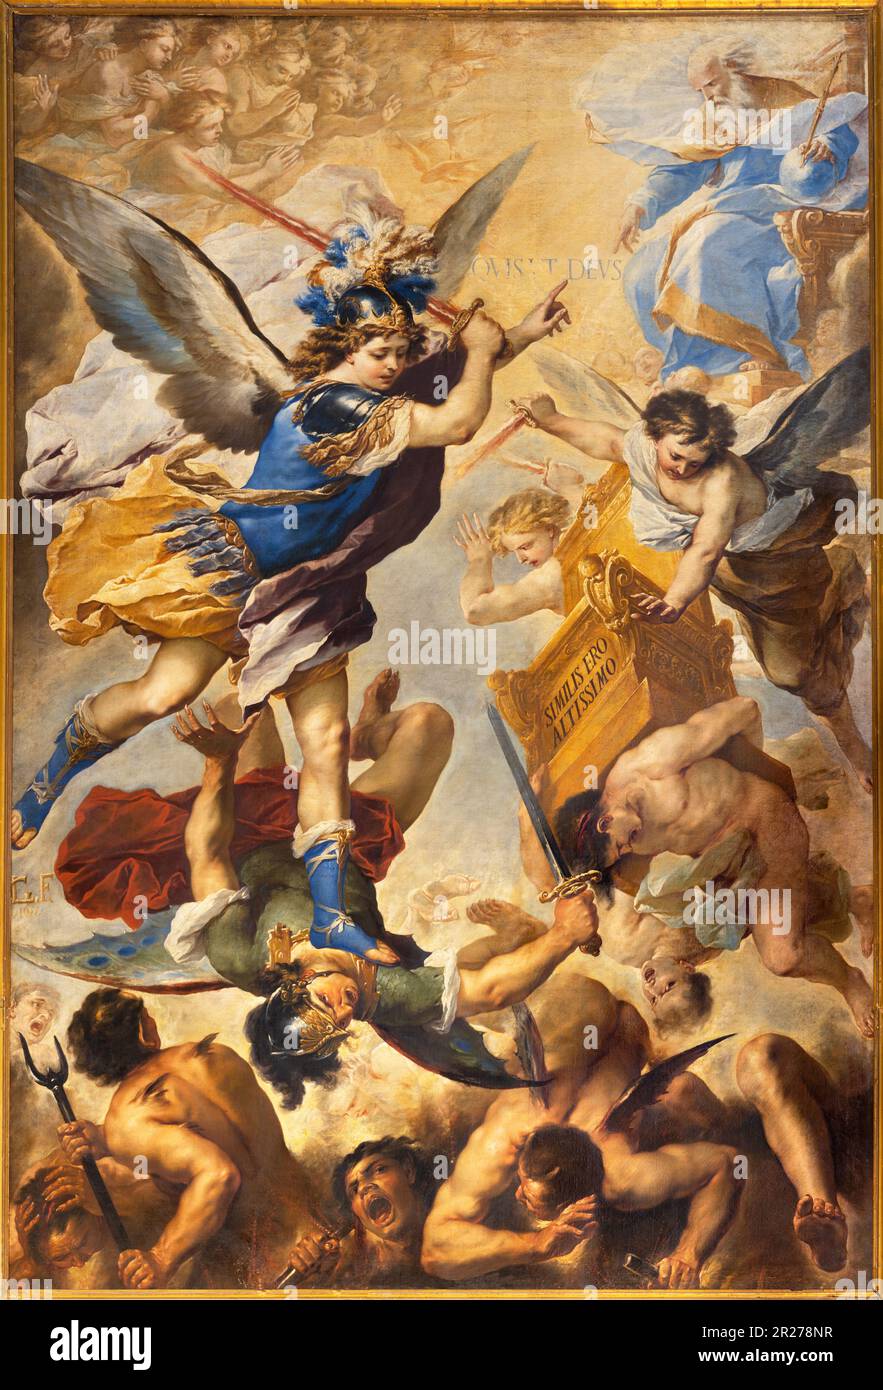 Naples - The painting of Fall of the Rebel Angels (Archangel Michael) in the church Chiesa dell' Ascensione a Chiaia by Luca Giordano (1657). Stock Photo